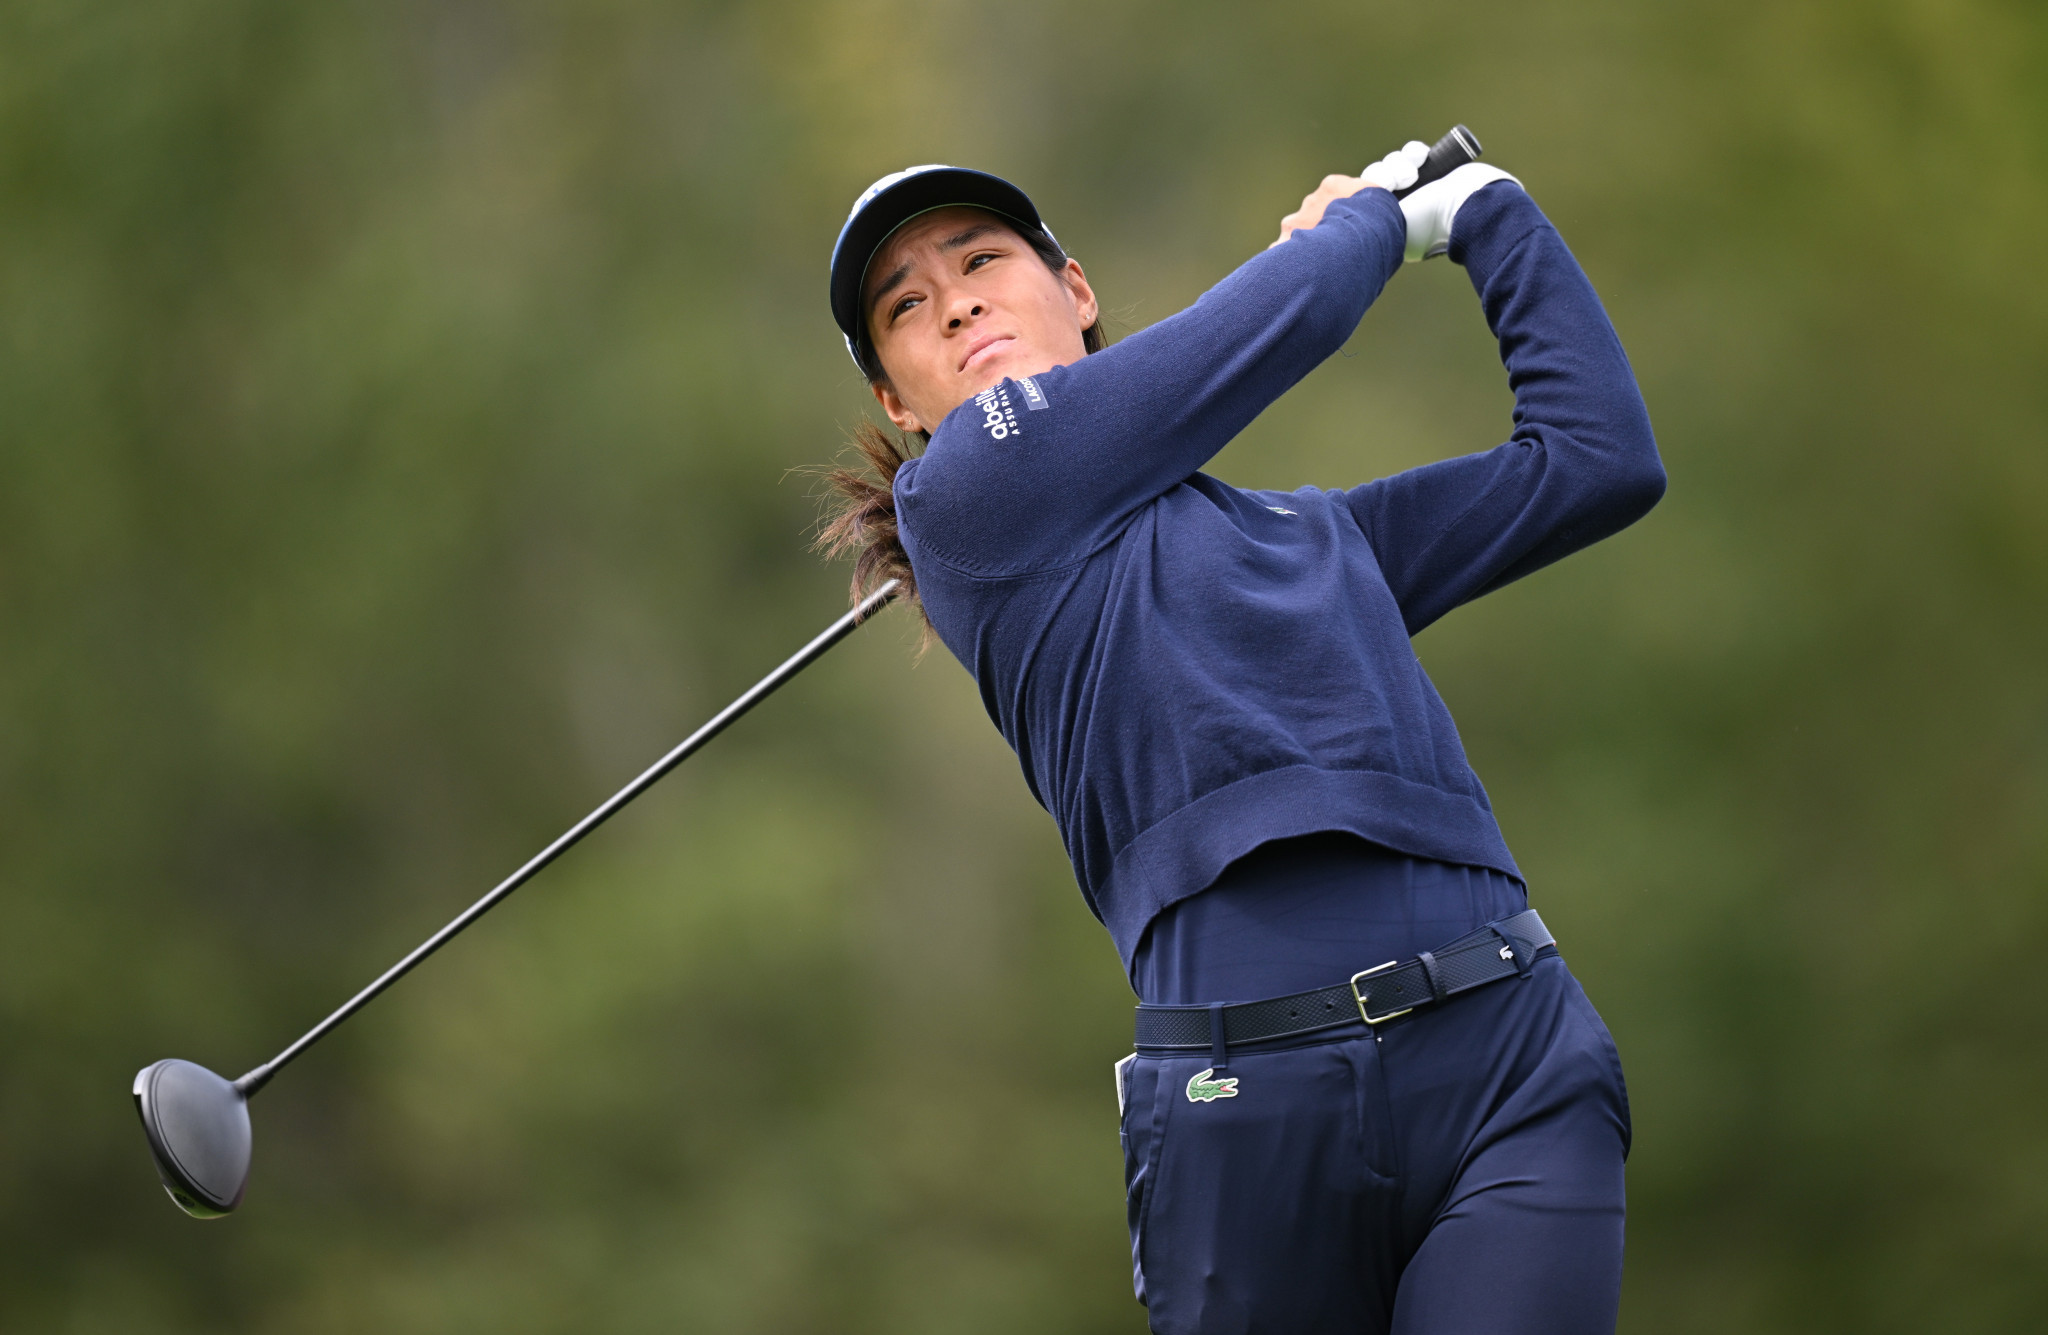 Celine Boutier is the big home hope at Evian-les-Bains, and will be hoping to improve on her previous efforts, of tying for 29th ©Getty Images